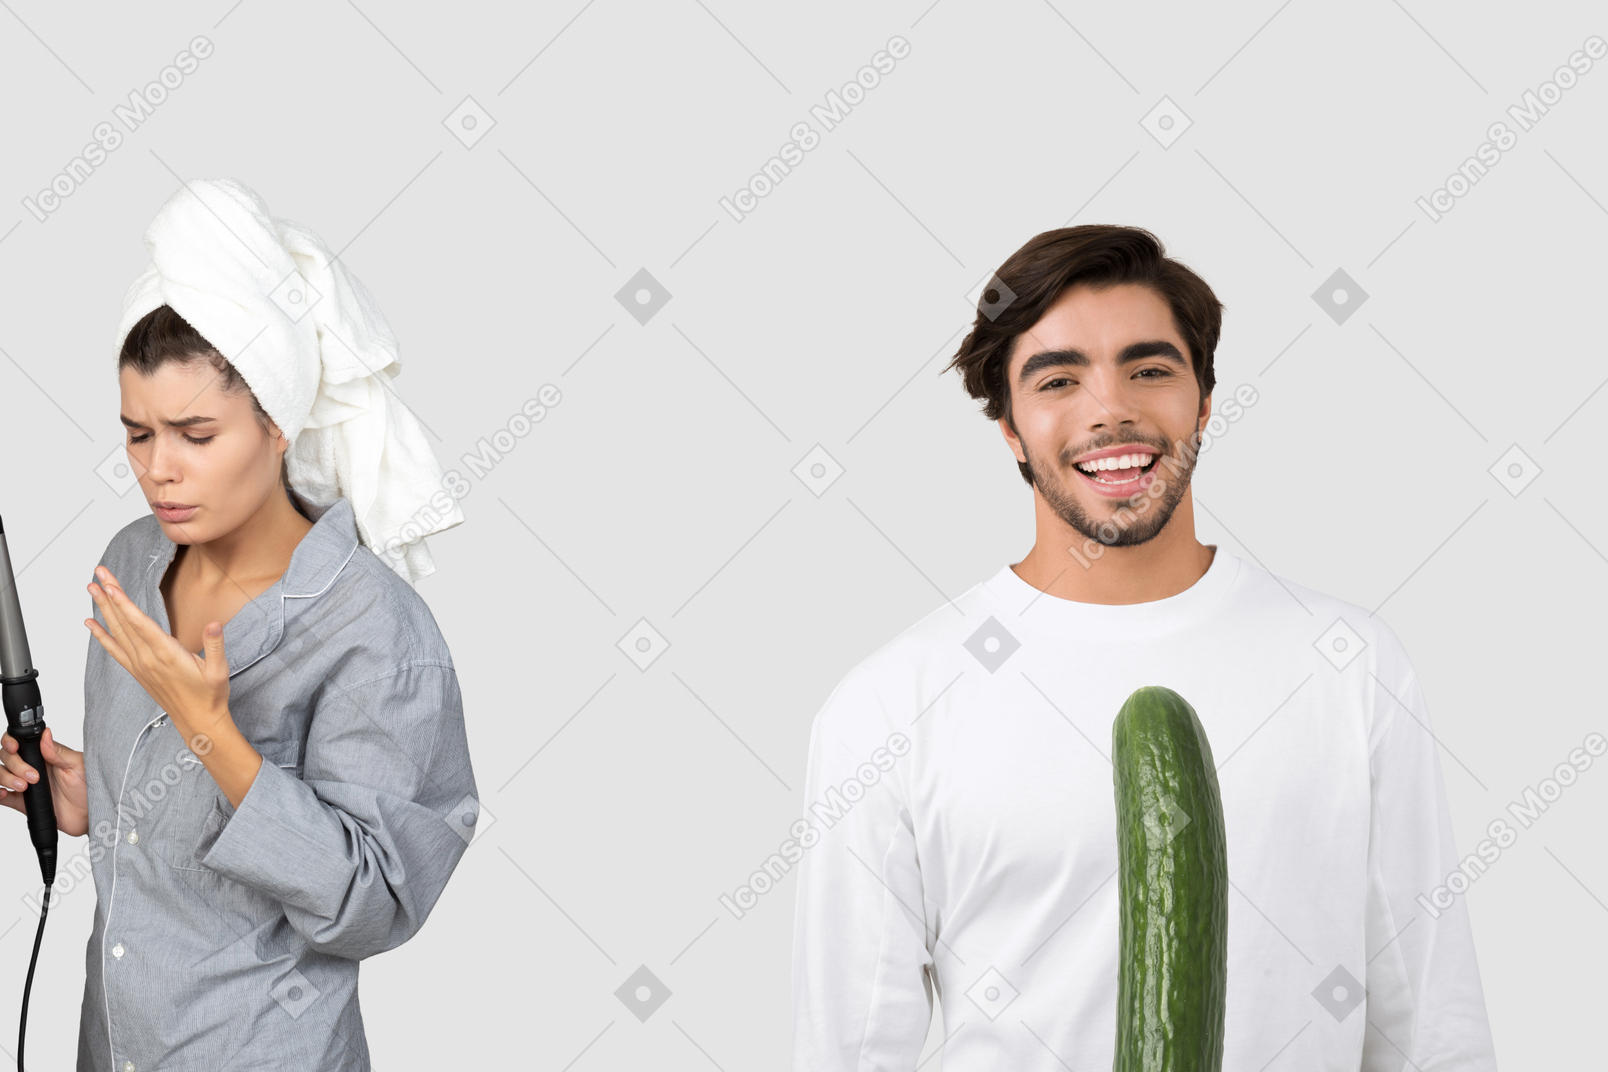 A woman with a hair curler and a man with a cucumber in front of him